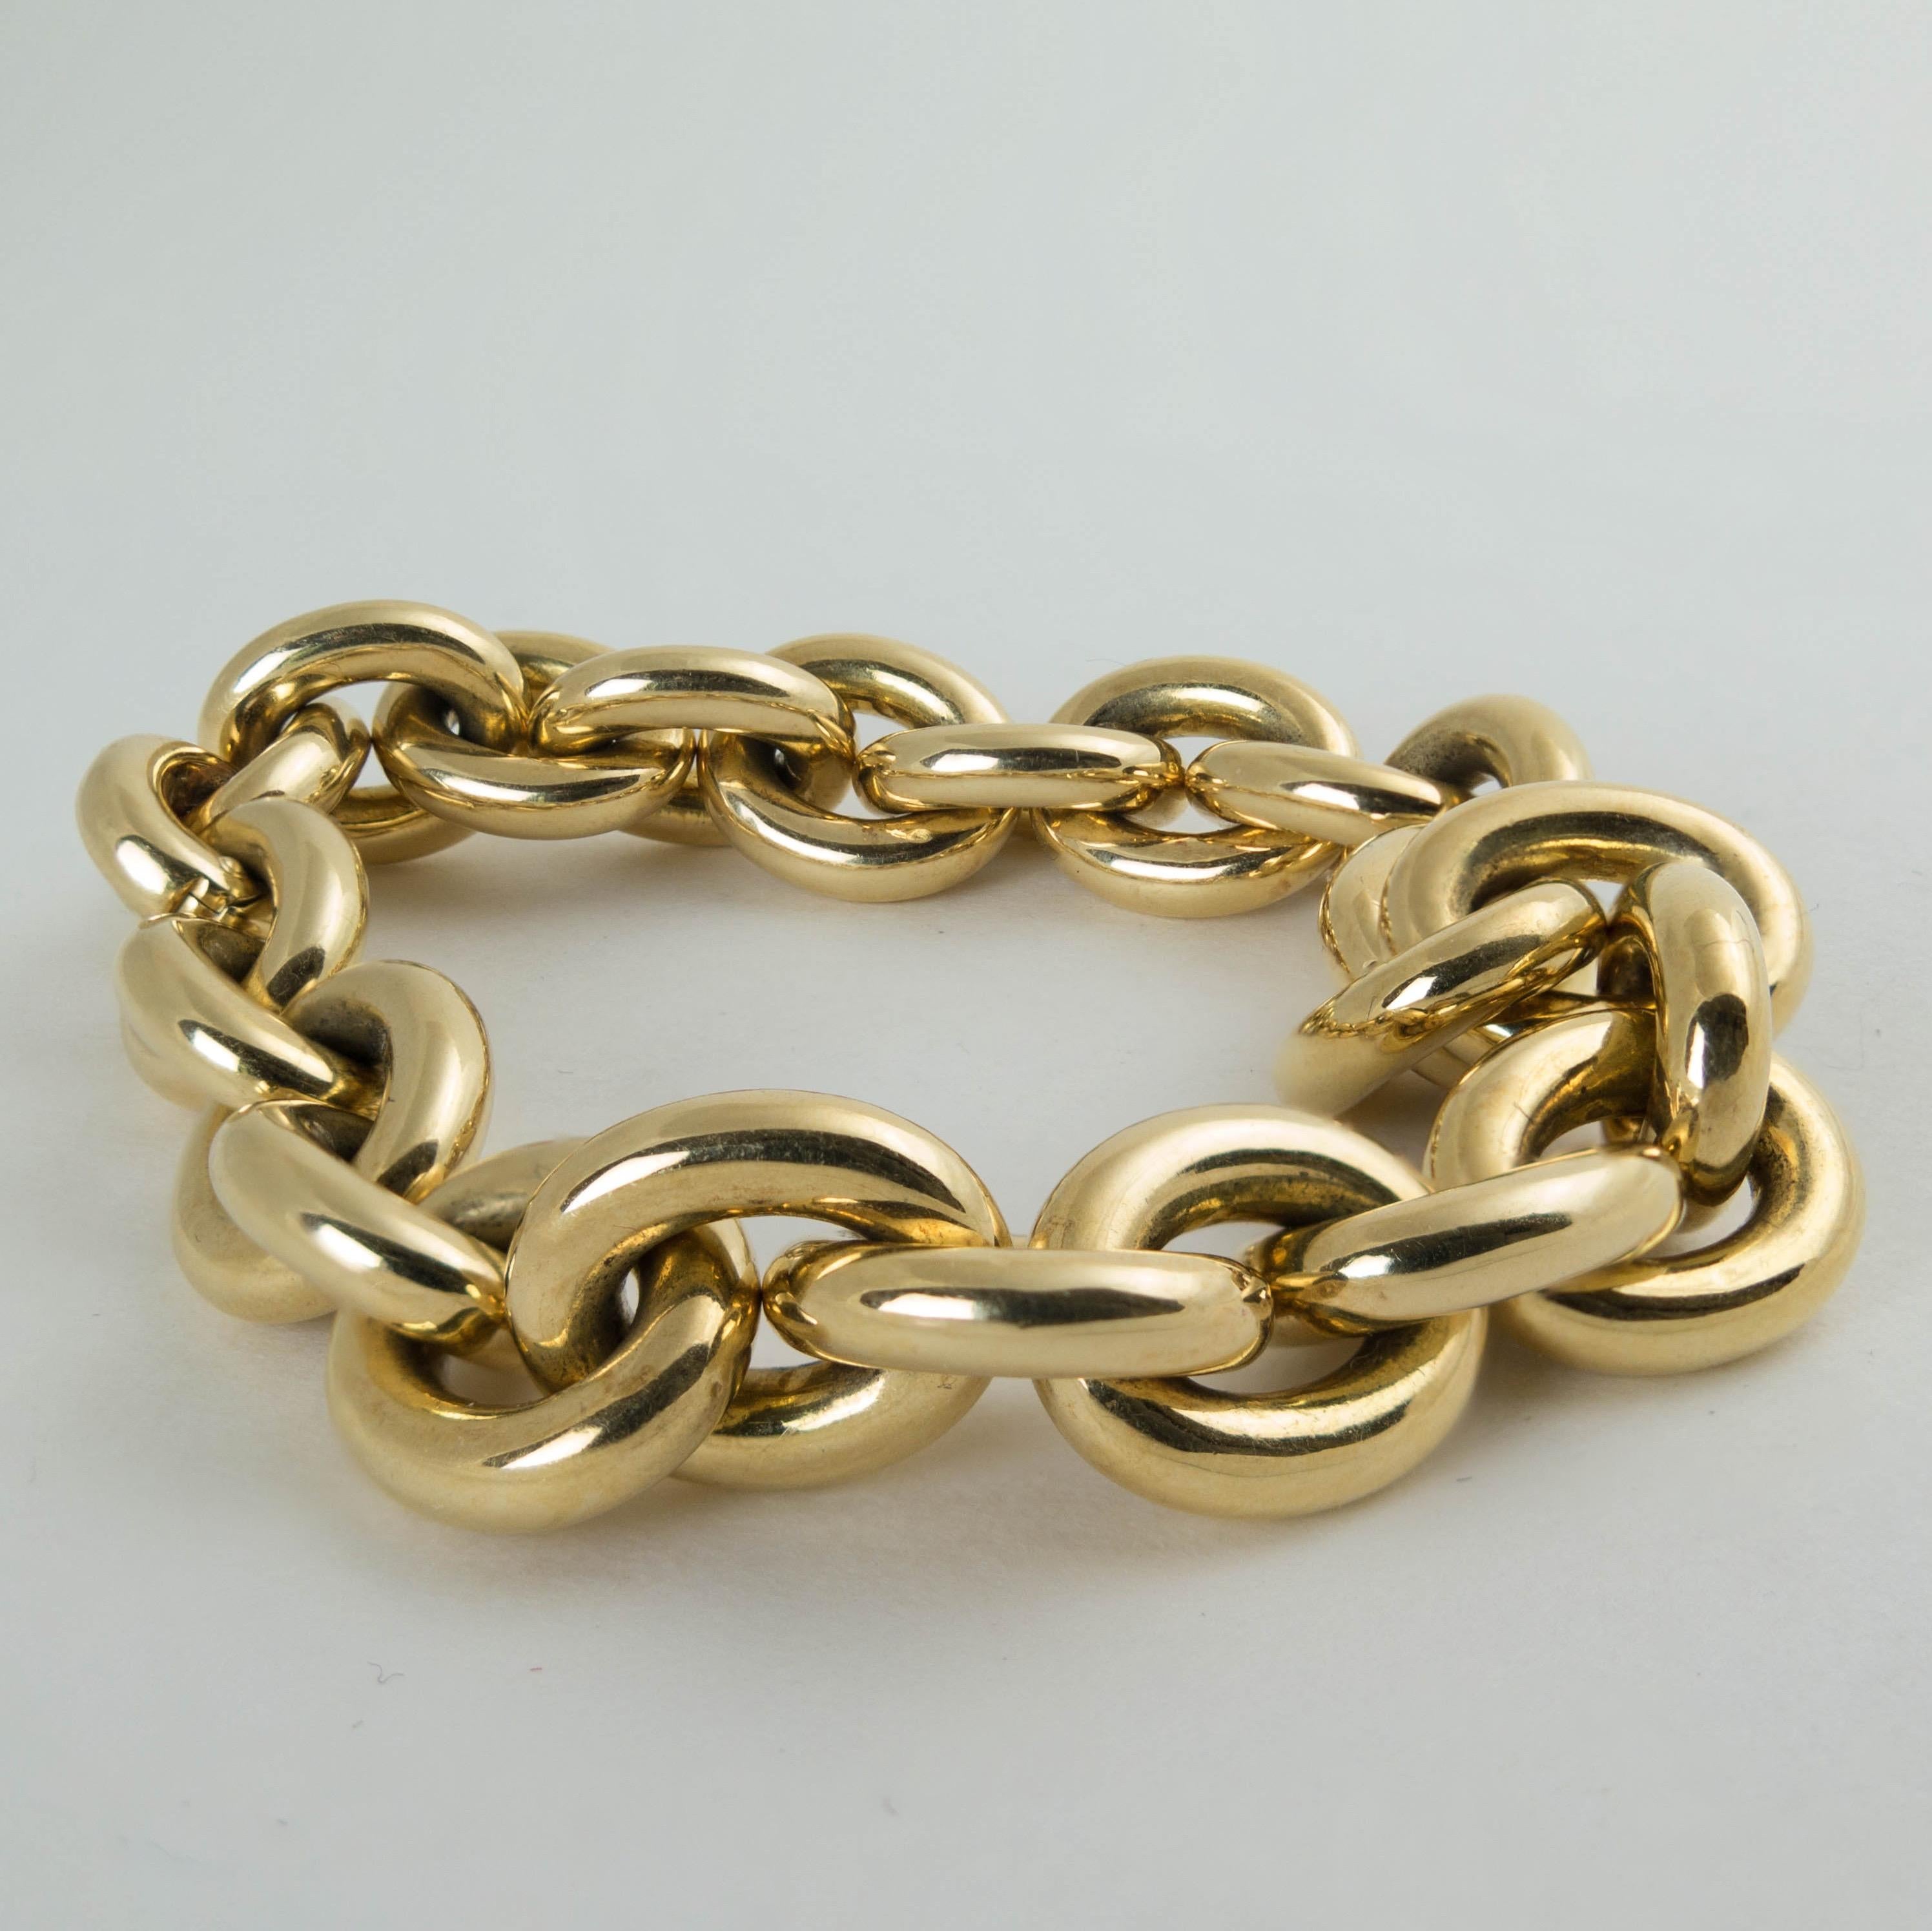 An elegant and classic vintage Pomellato 18k yellow gold chain link bracelet, circa 1990's. 

The heavy gold link bracelet comprised of 24 solid gold oval links. One link with a hidden clasp. The gold bright and radiant.
Signed Pomellato and marked